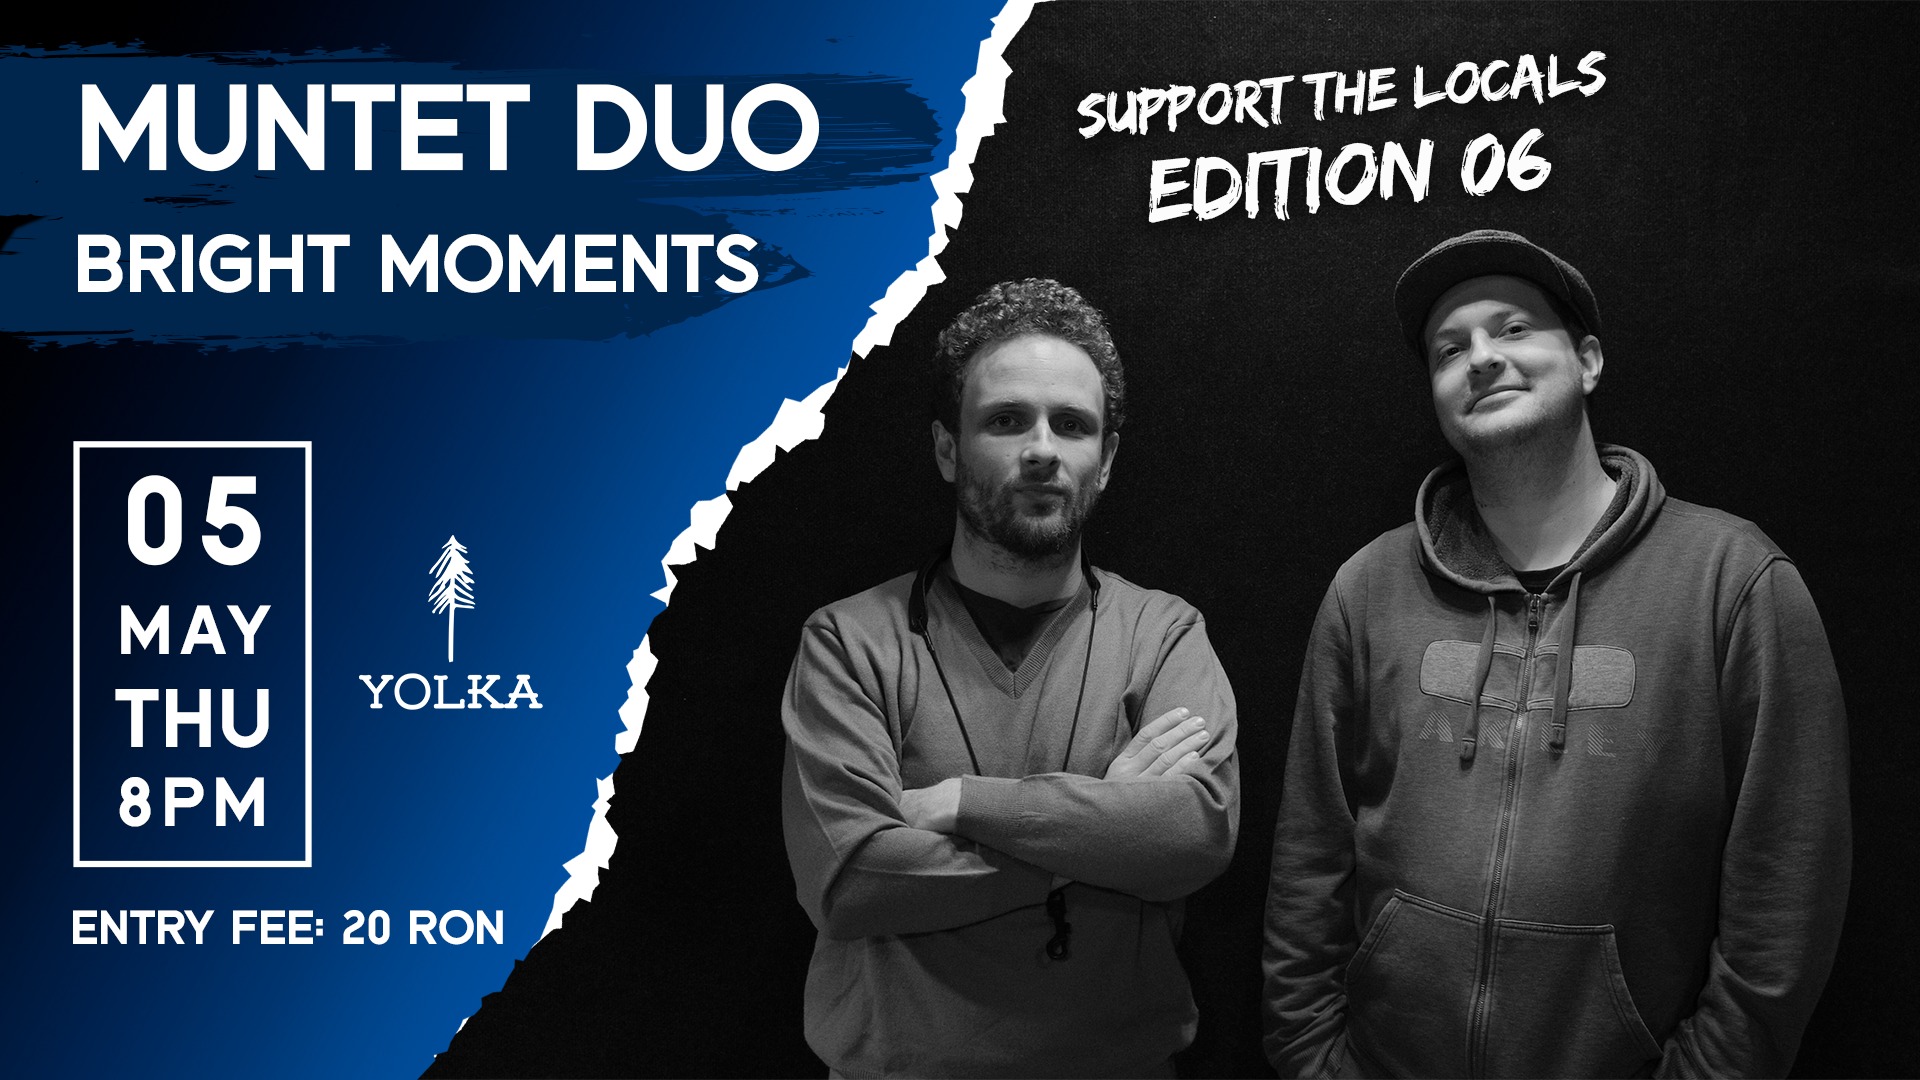 Support the Locals: Edition 06 w/ Montet Duo